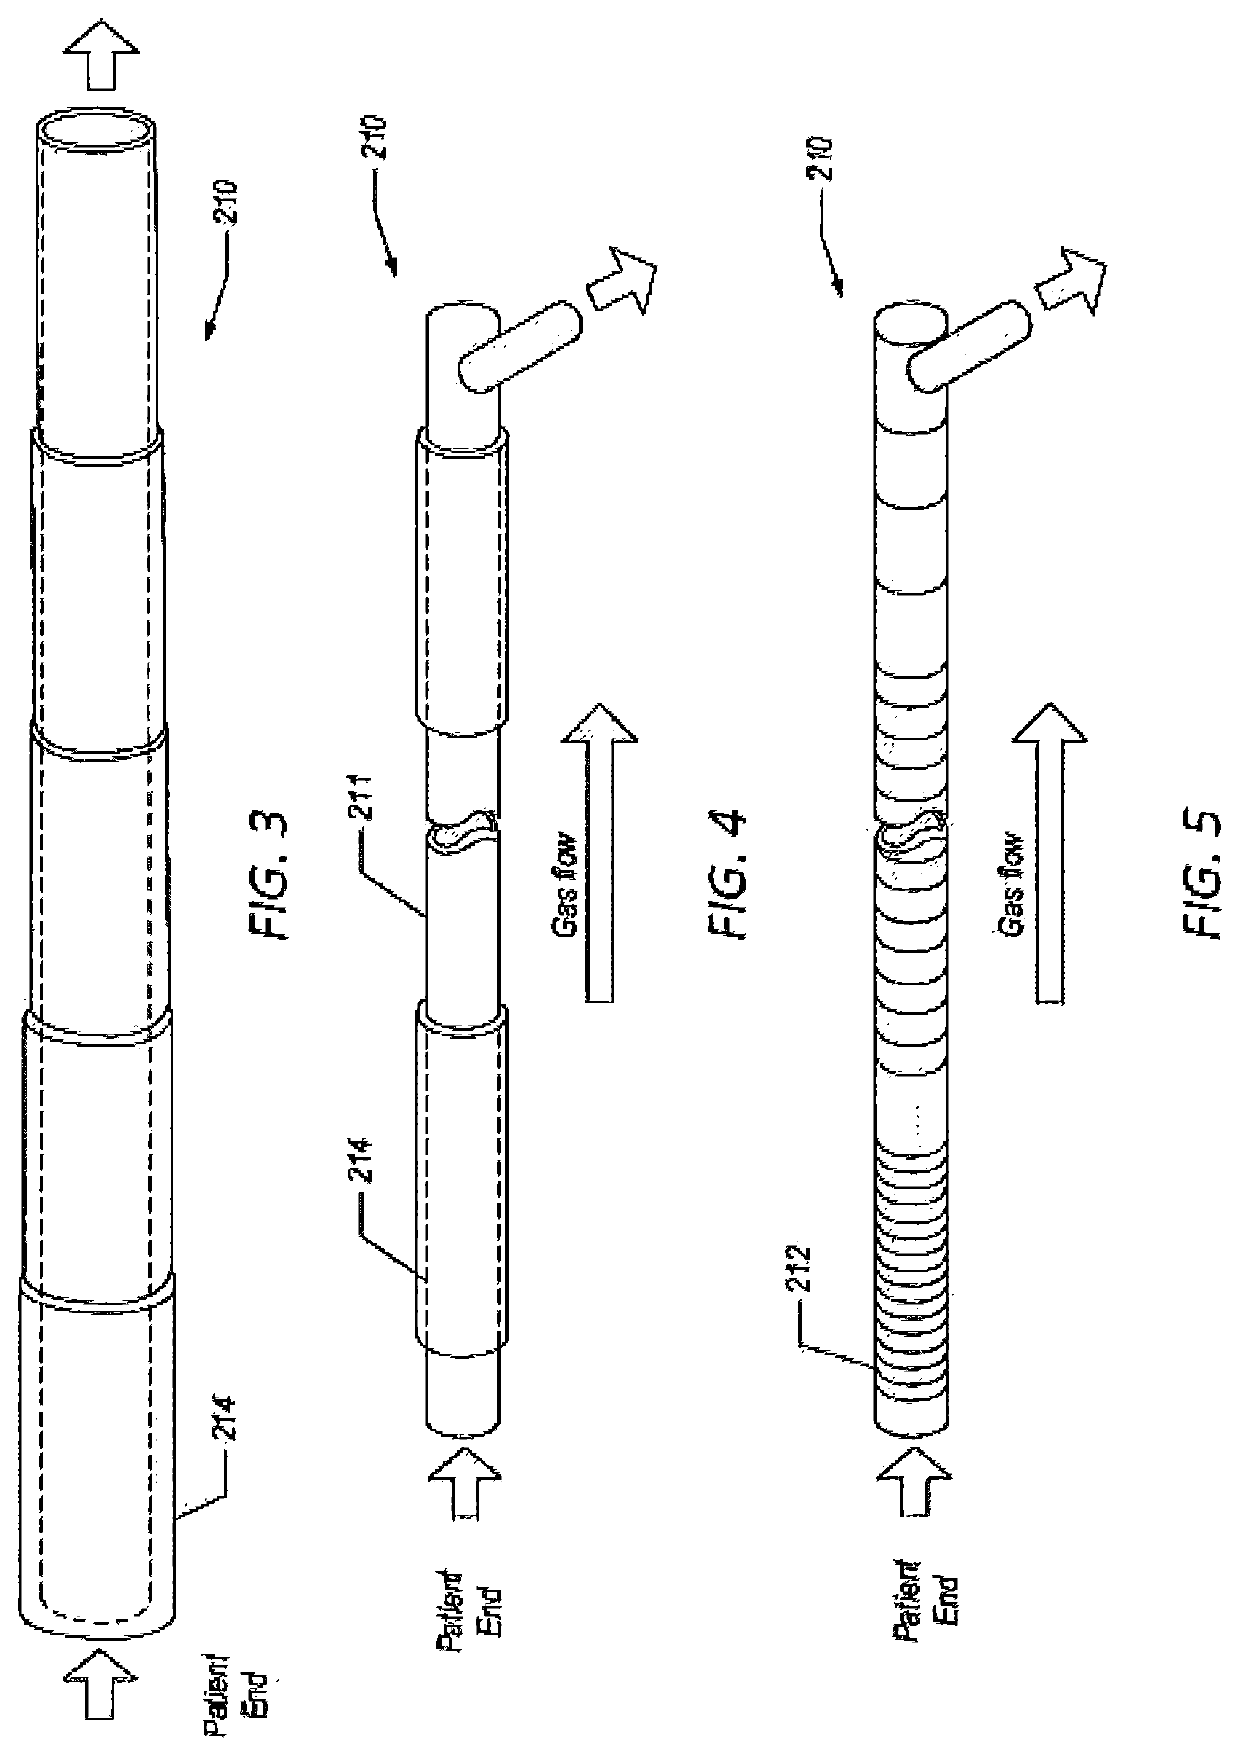 Drying expiratory limb with tailored temperature profile and multi-lumen configuration